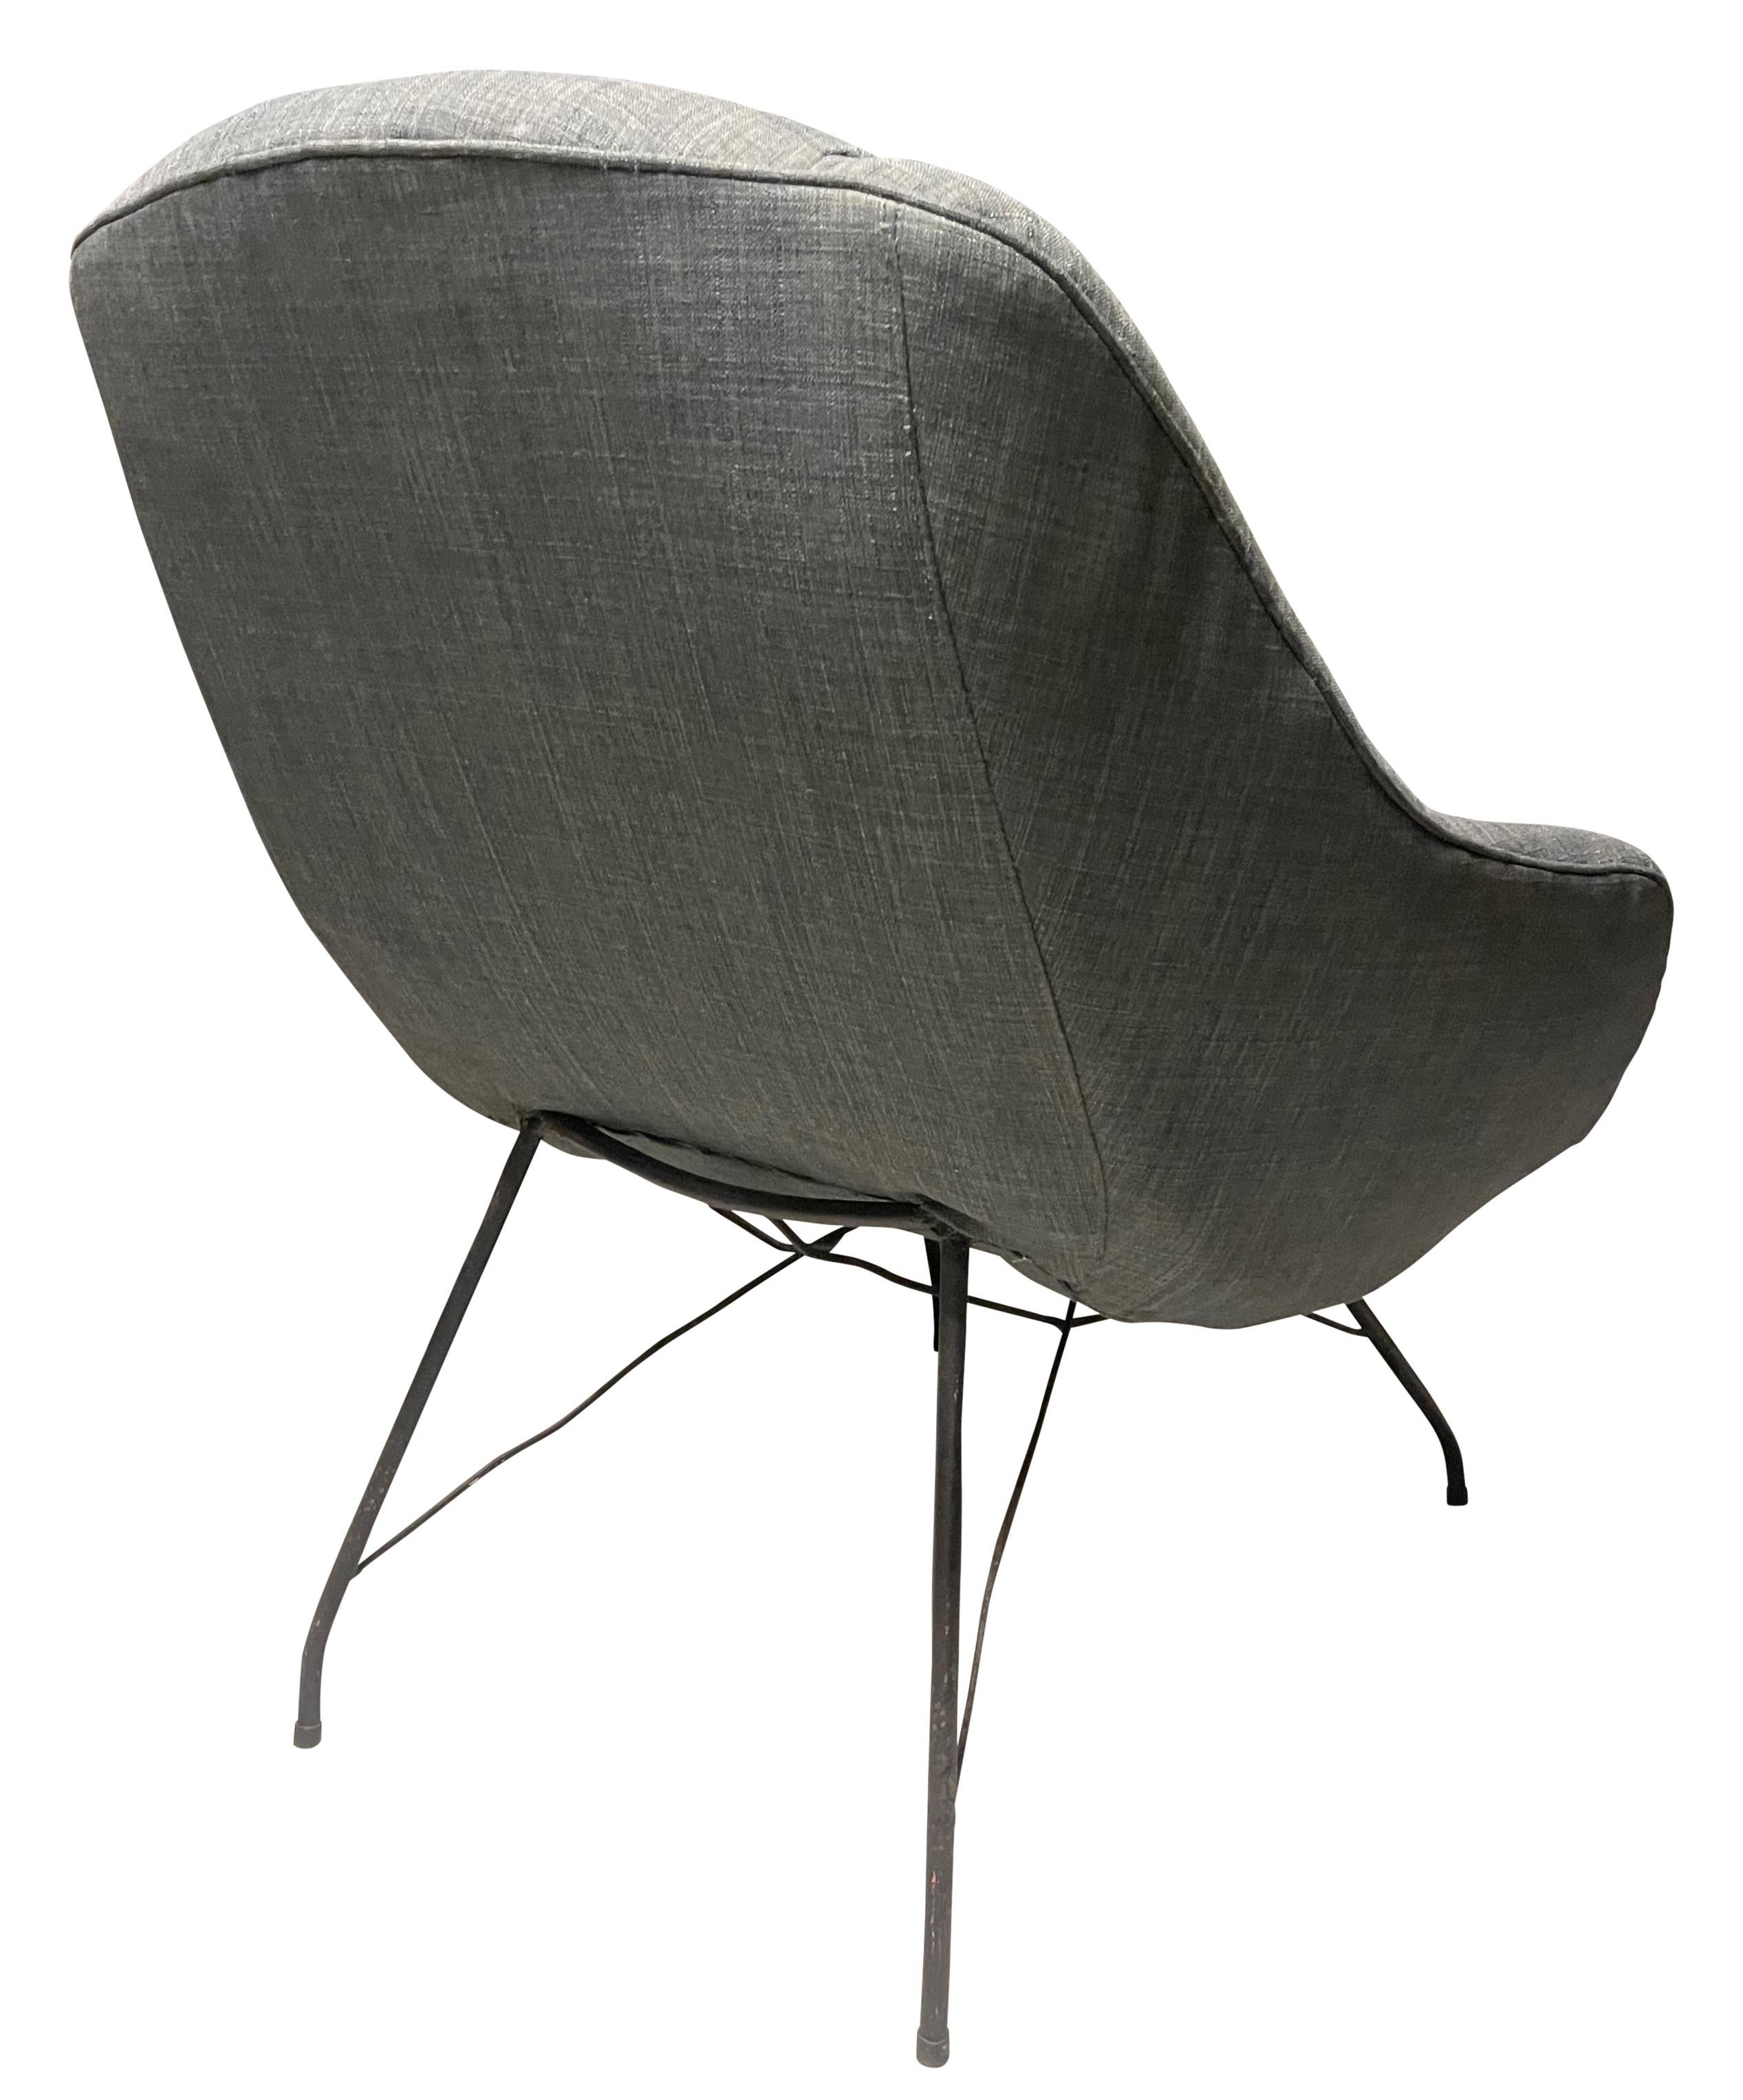 Carlo Hauner Martin Eisler Concha Lounge Chair, Brazil, 1950 In Good Condition For Sale In San Francisco, CA